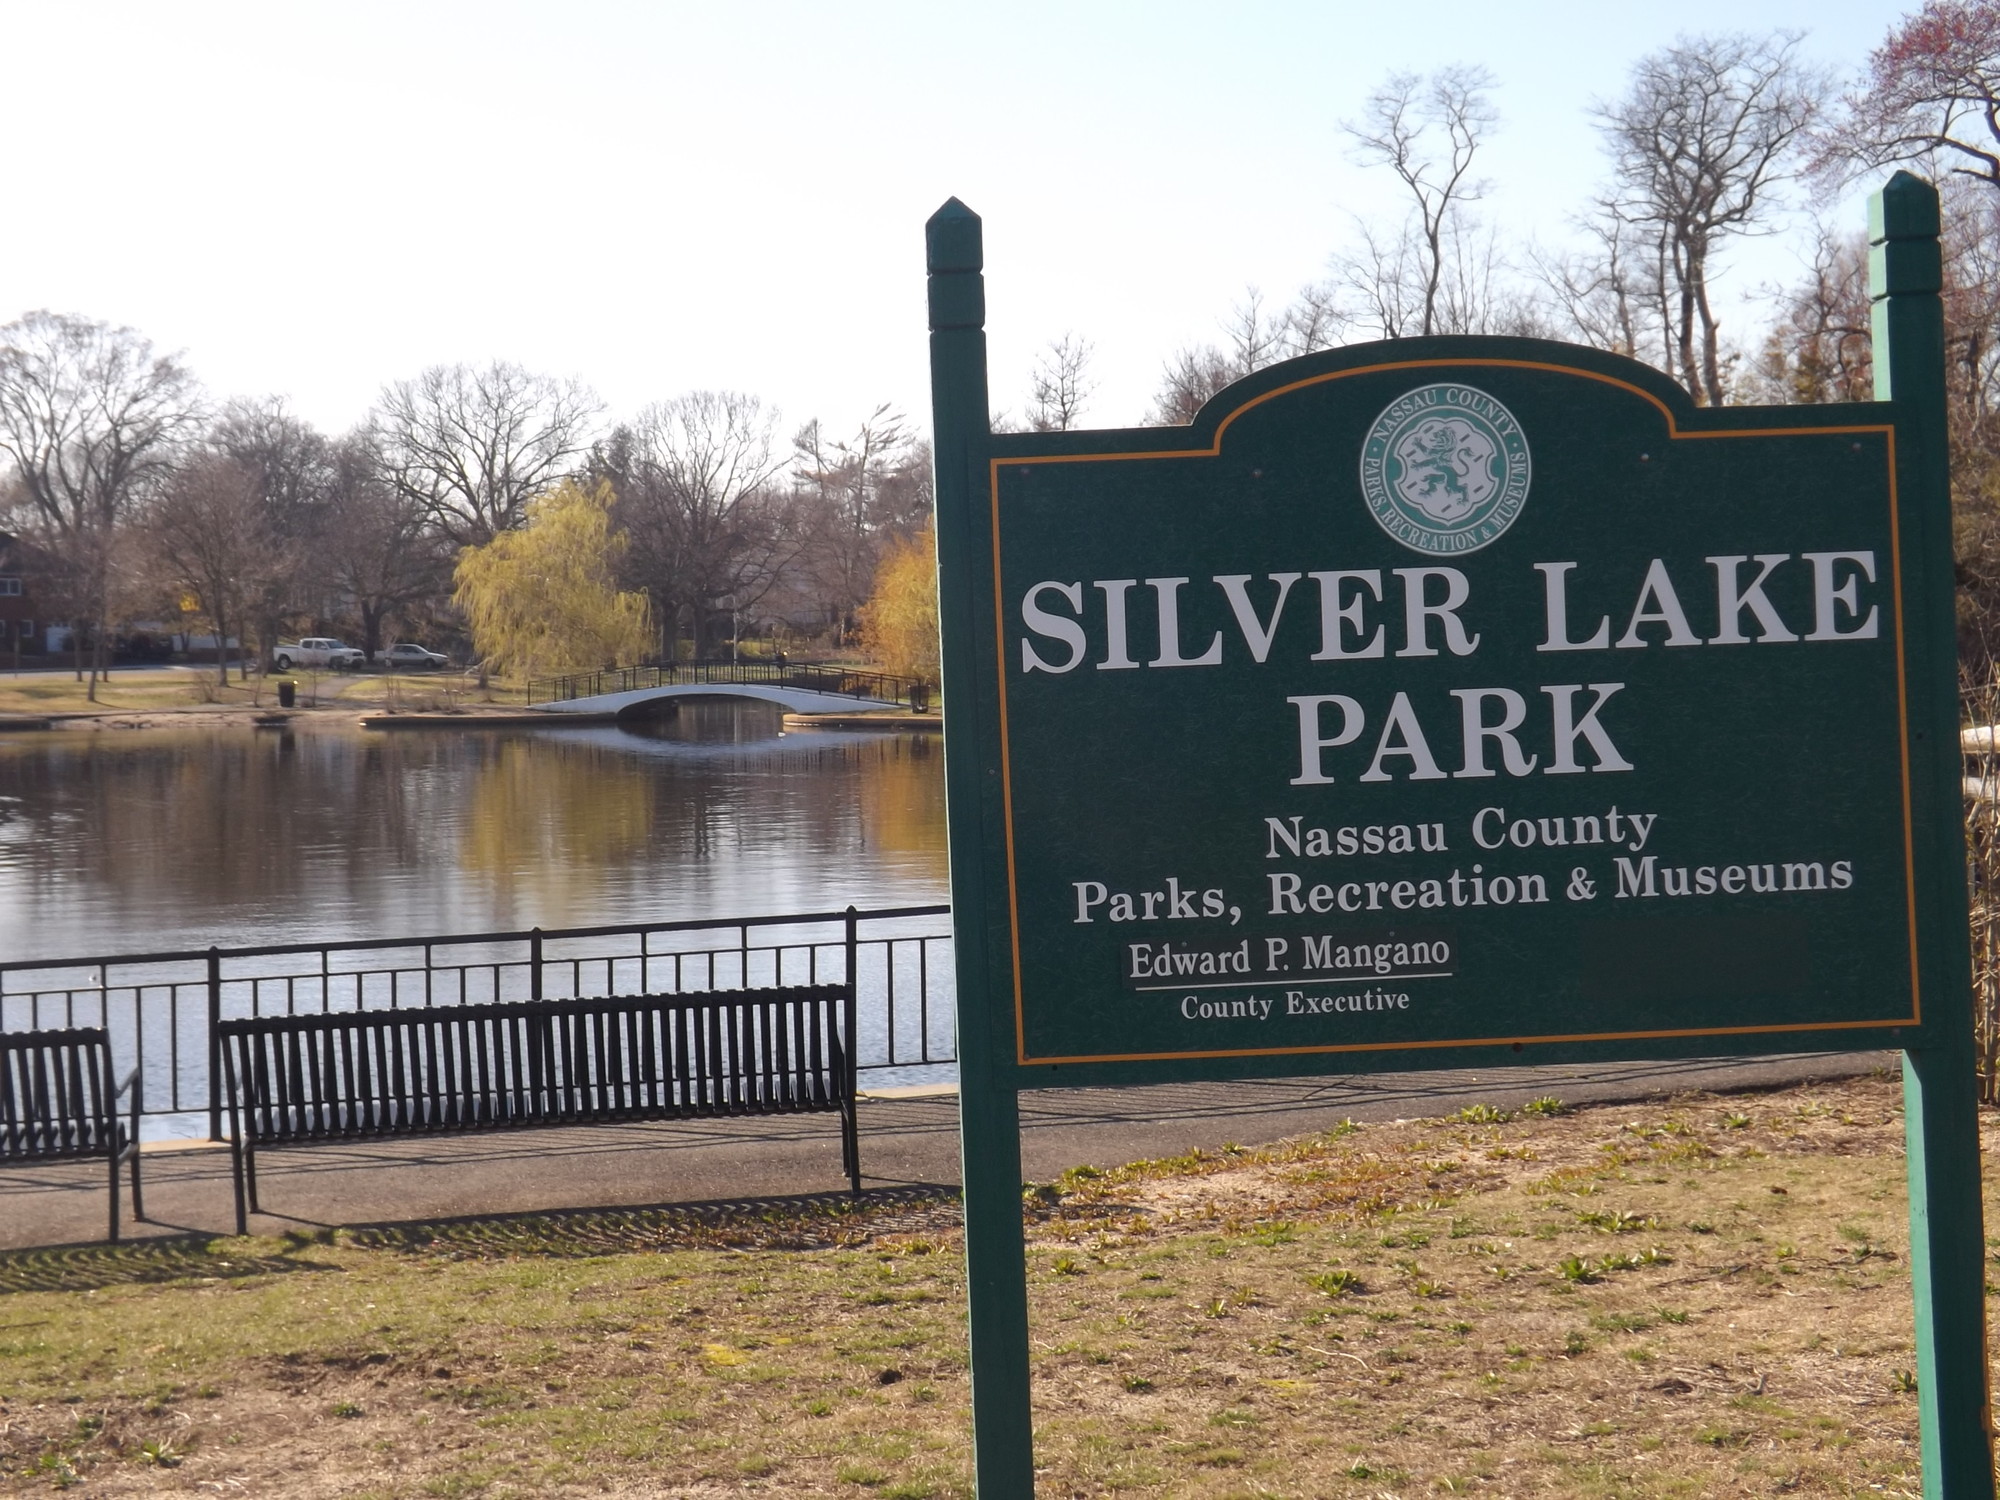 Silver Lake park is known for its scenery, but the views can be marred by stormwater runoff.